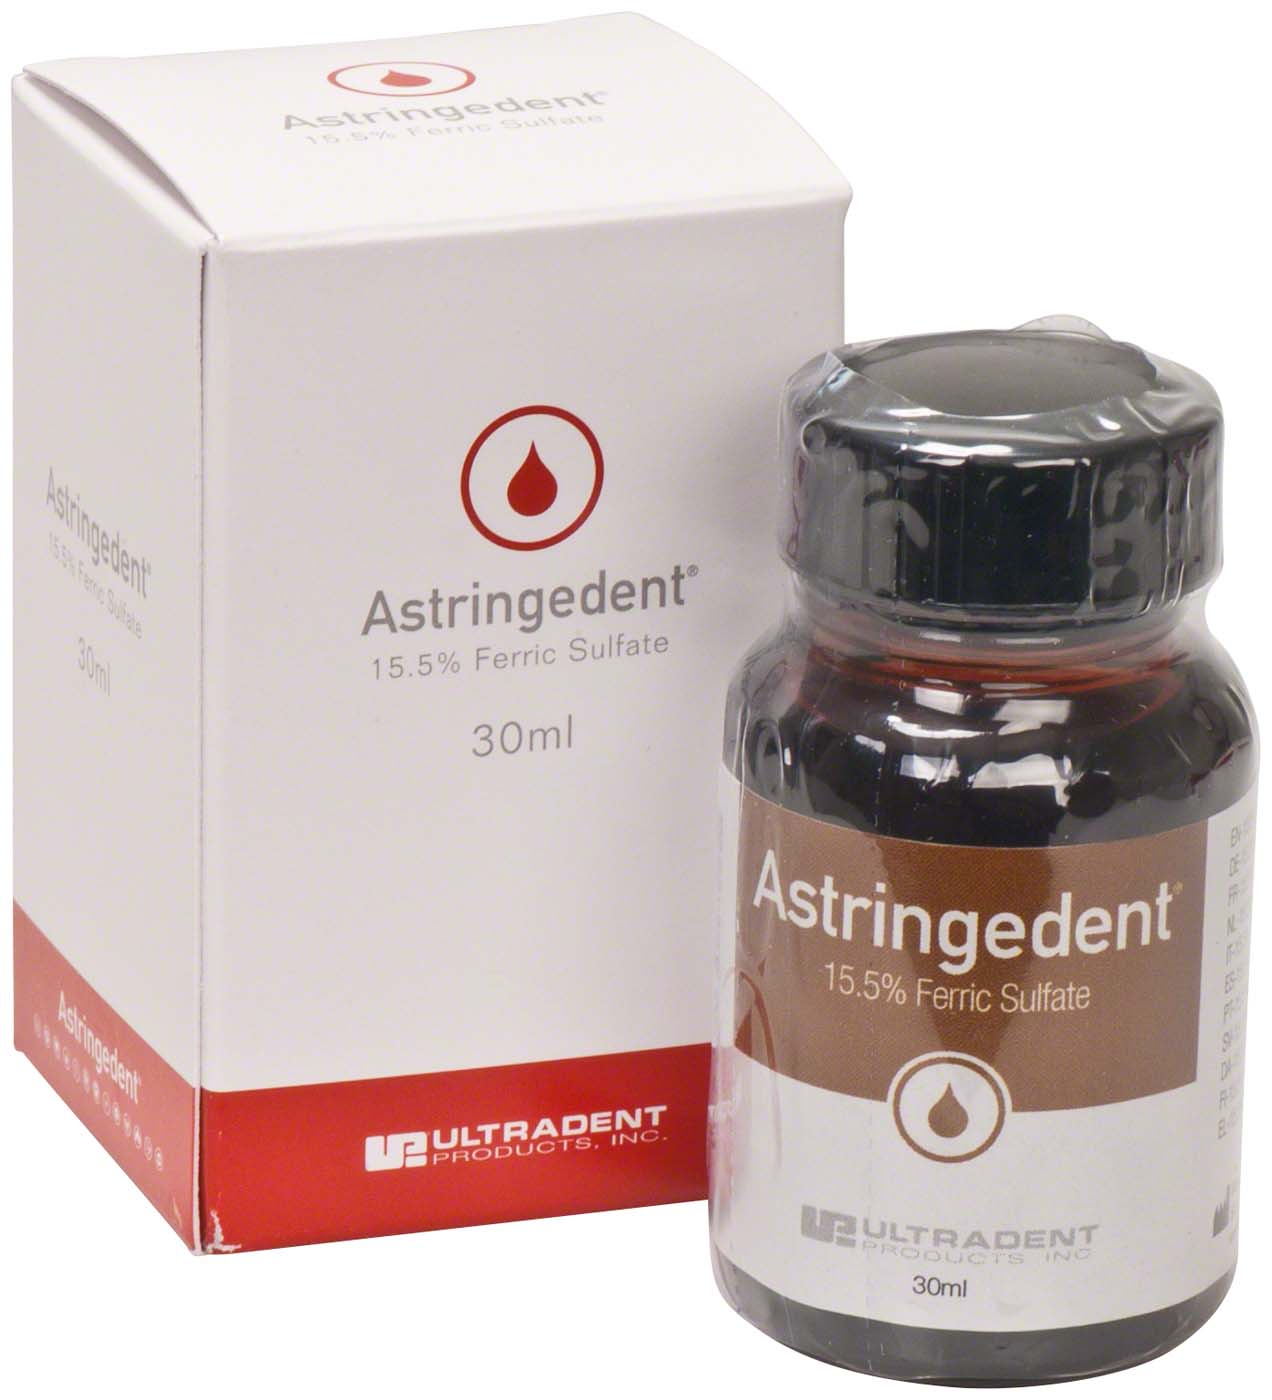 Astringedent™ Ultradent Products